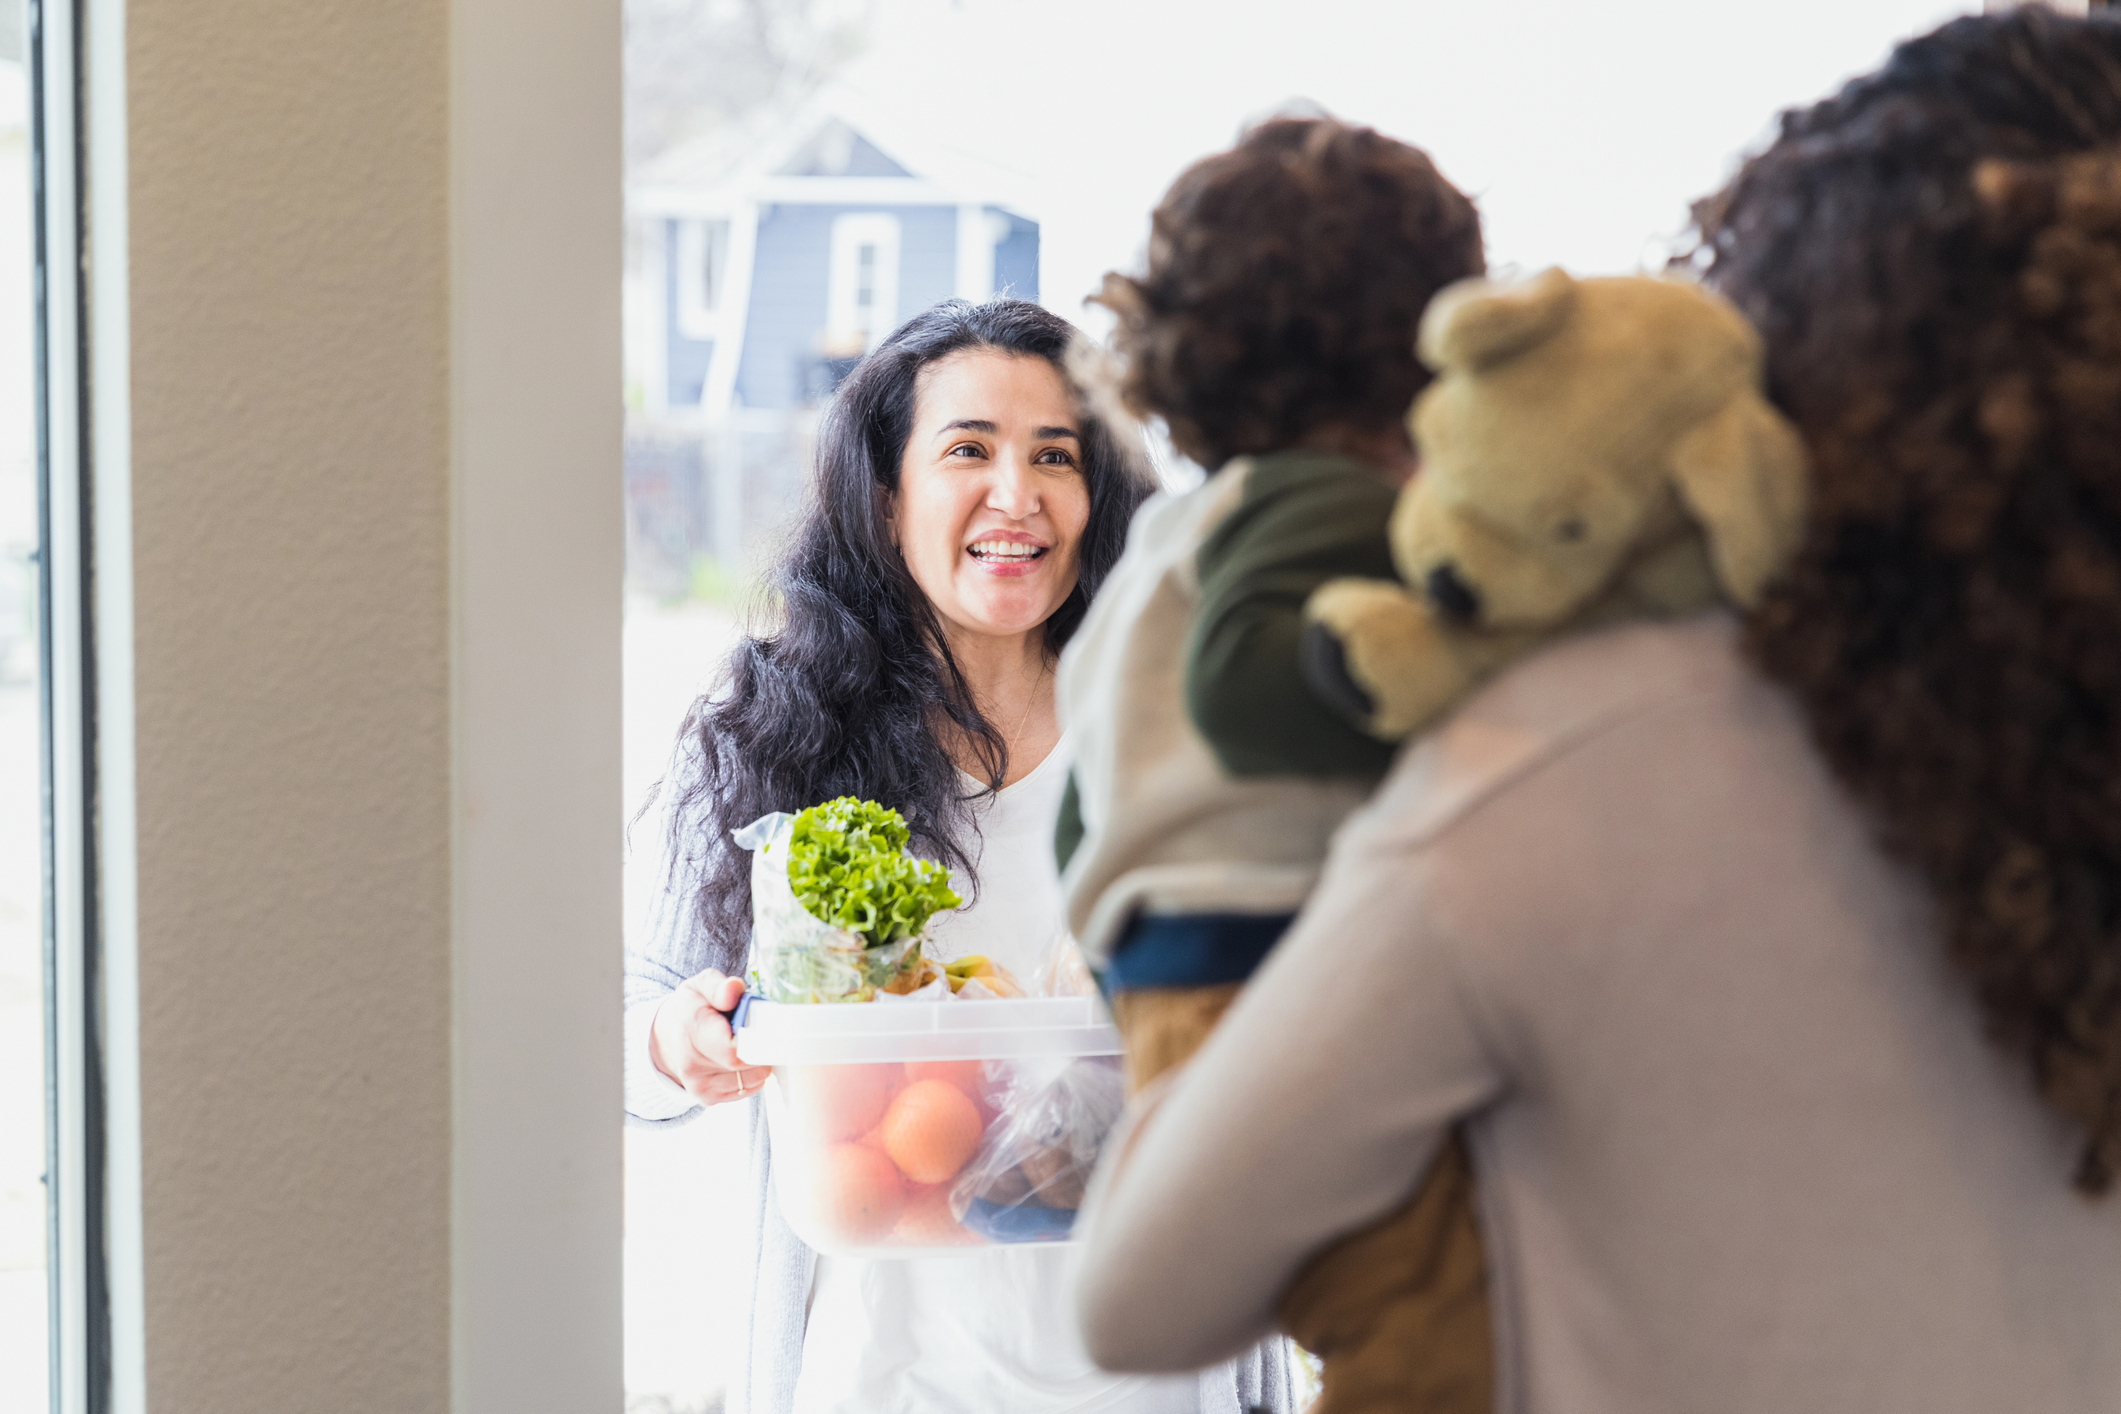 Woman holding a food bowl smiling at another woman carrying a child with a plush toy. They are indoors, possibly at a gathering